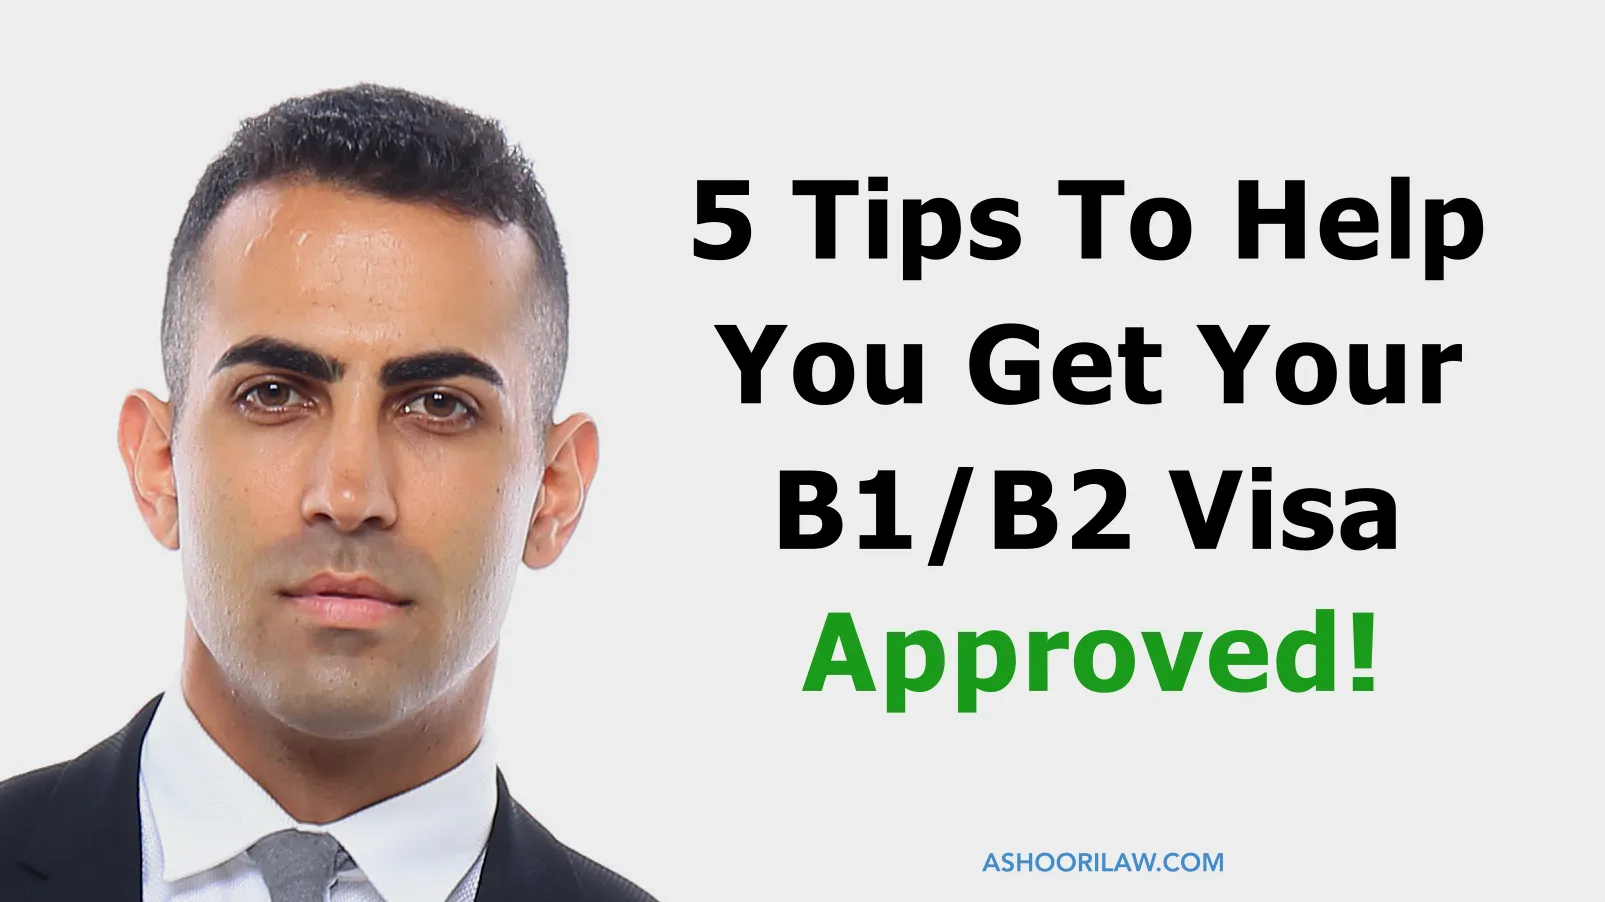 5 Tips to Help You Get Your B1-B2 Visa Approved